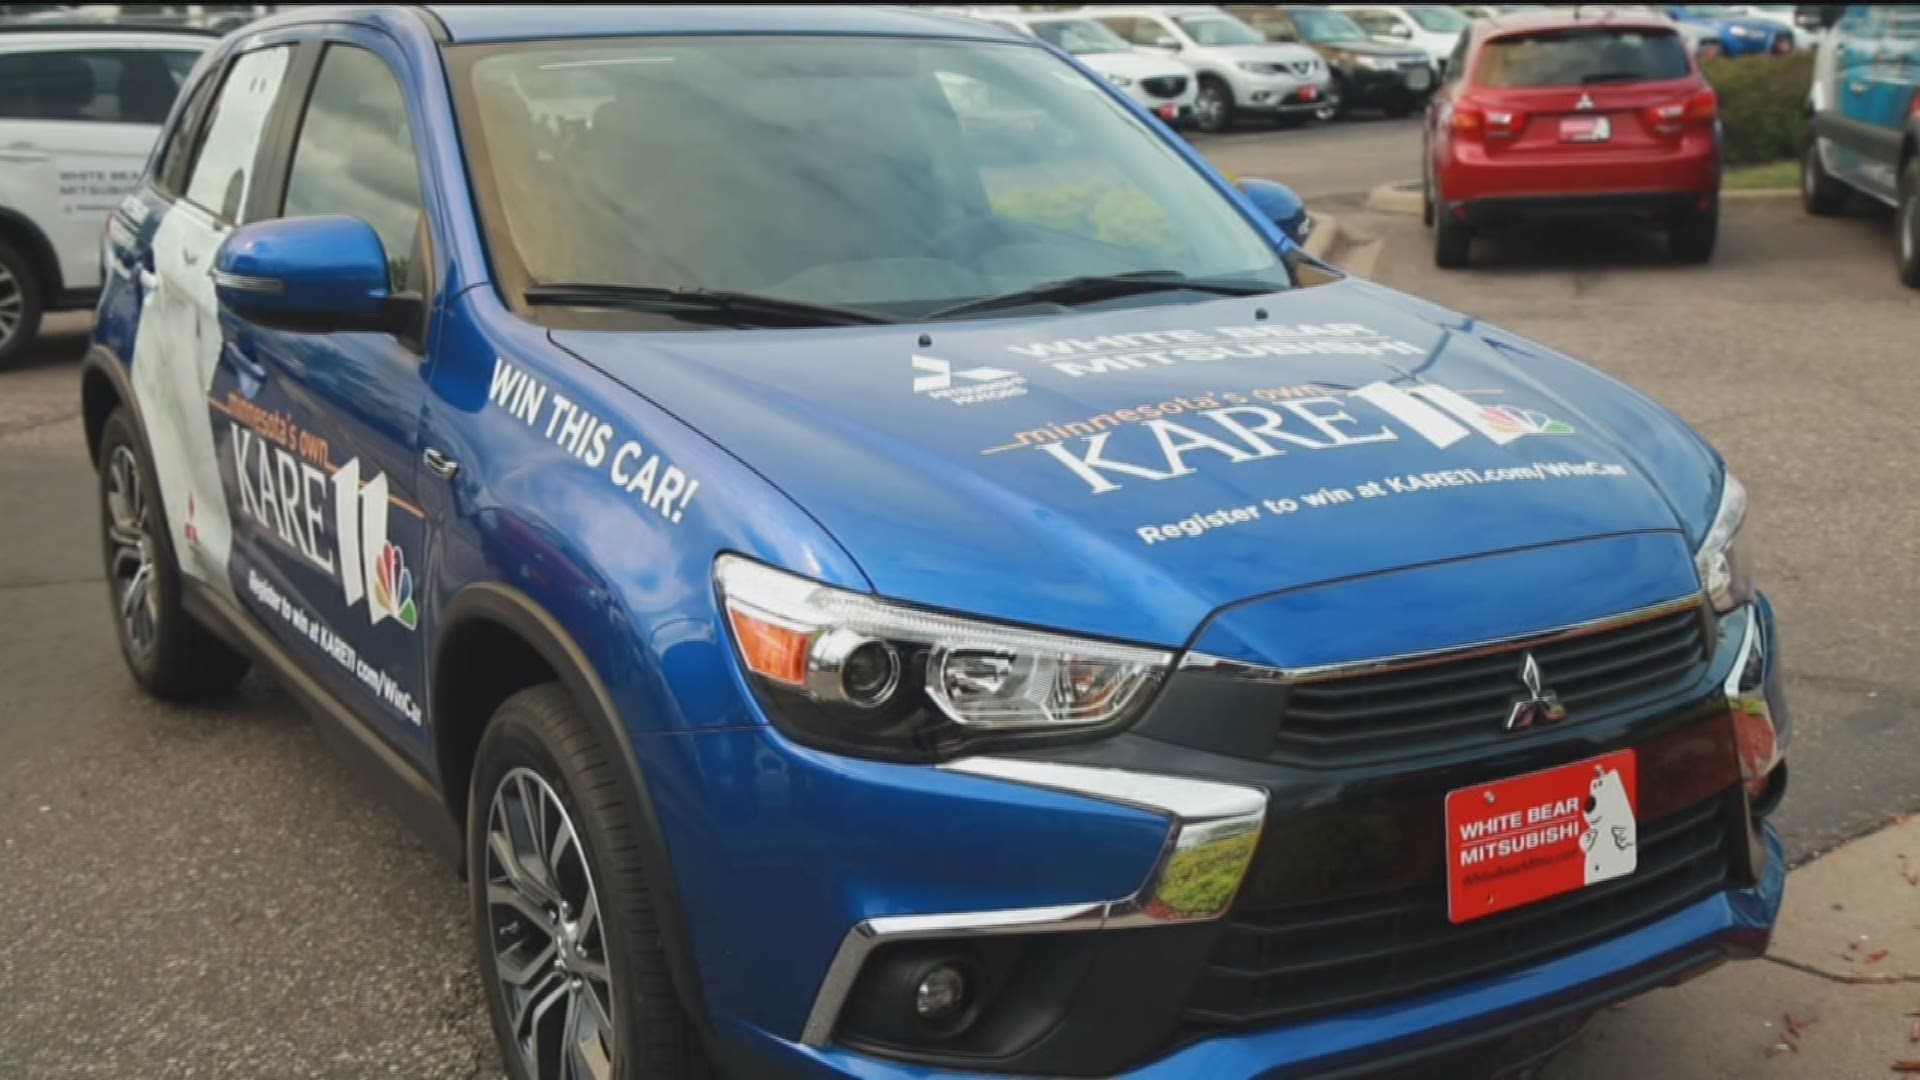 KARE 11 and White Bear Mitsubishi have teamed up to Celebrate Summer with a chance to win a brand new car.